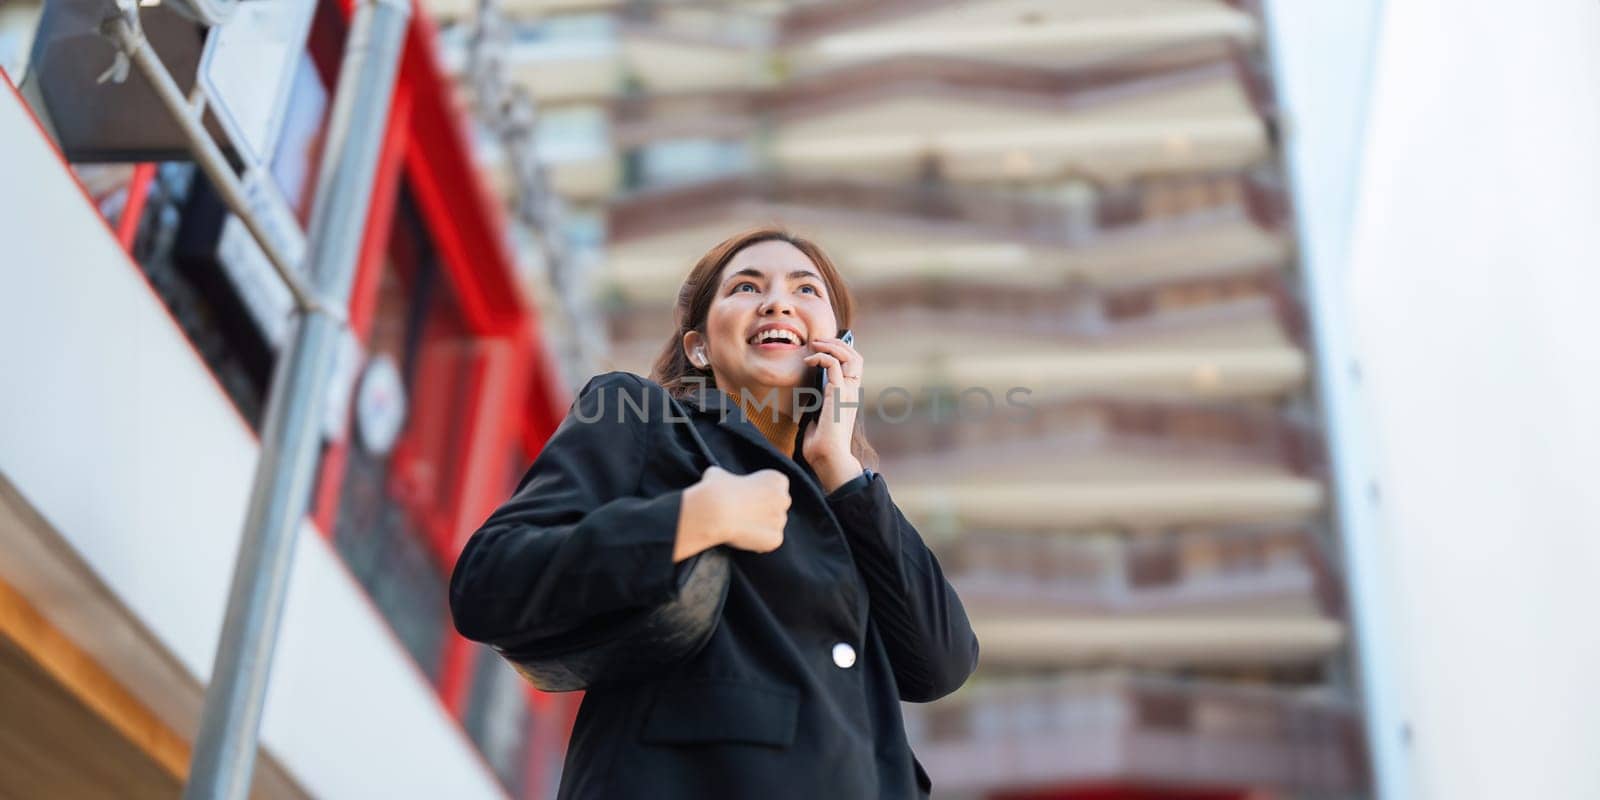 Business woman successful using smartphone walking outdoors to work. beautiful woman going to working with smartphone walking near office building.